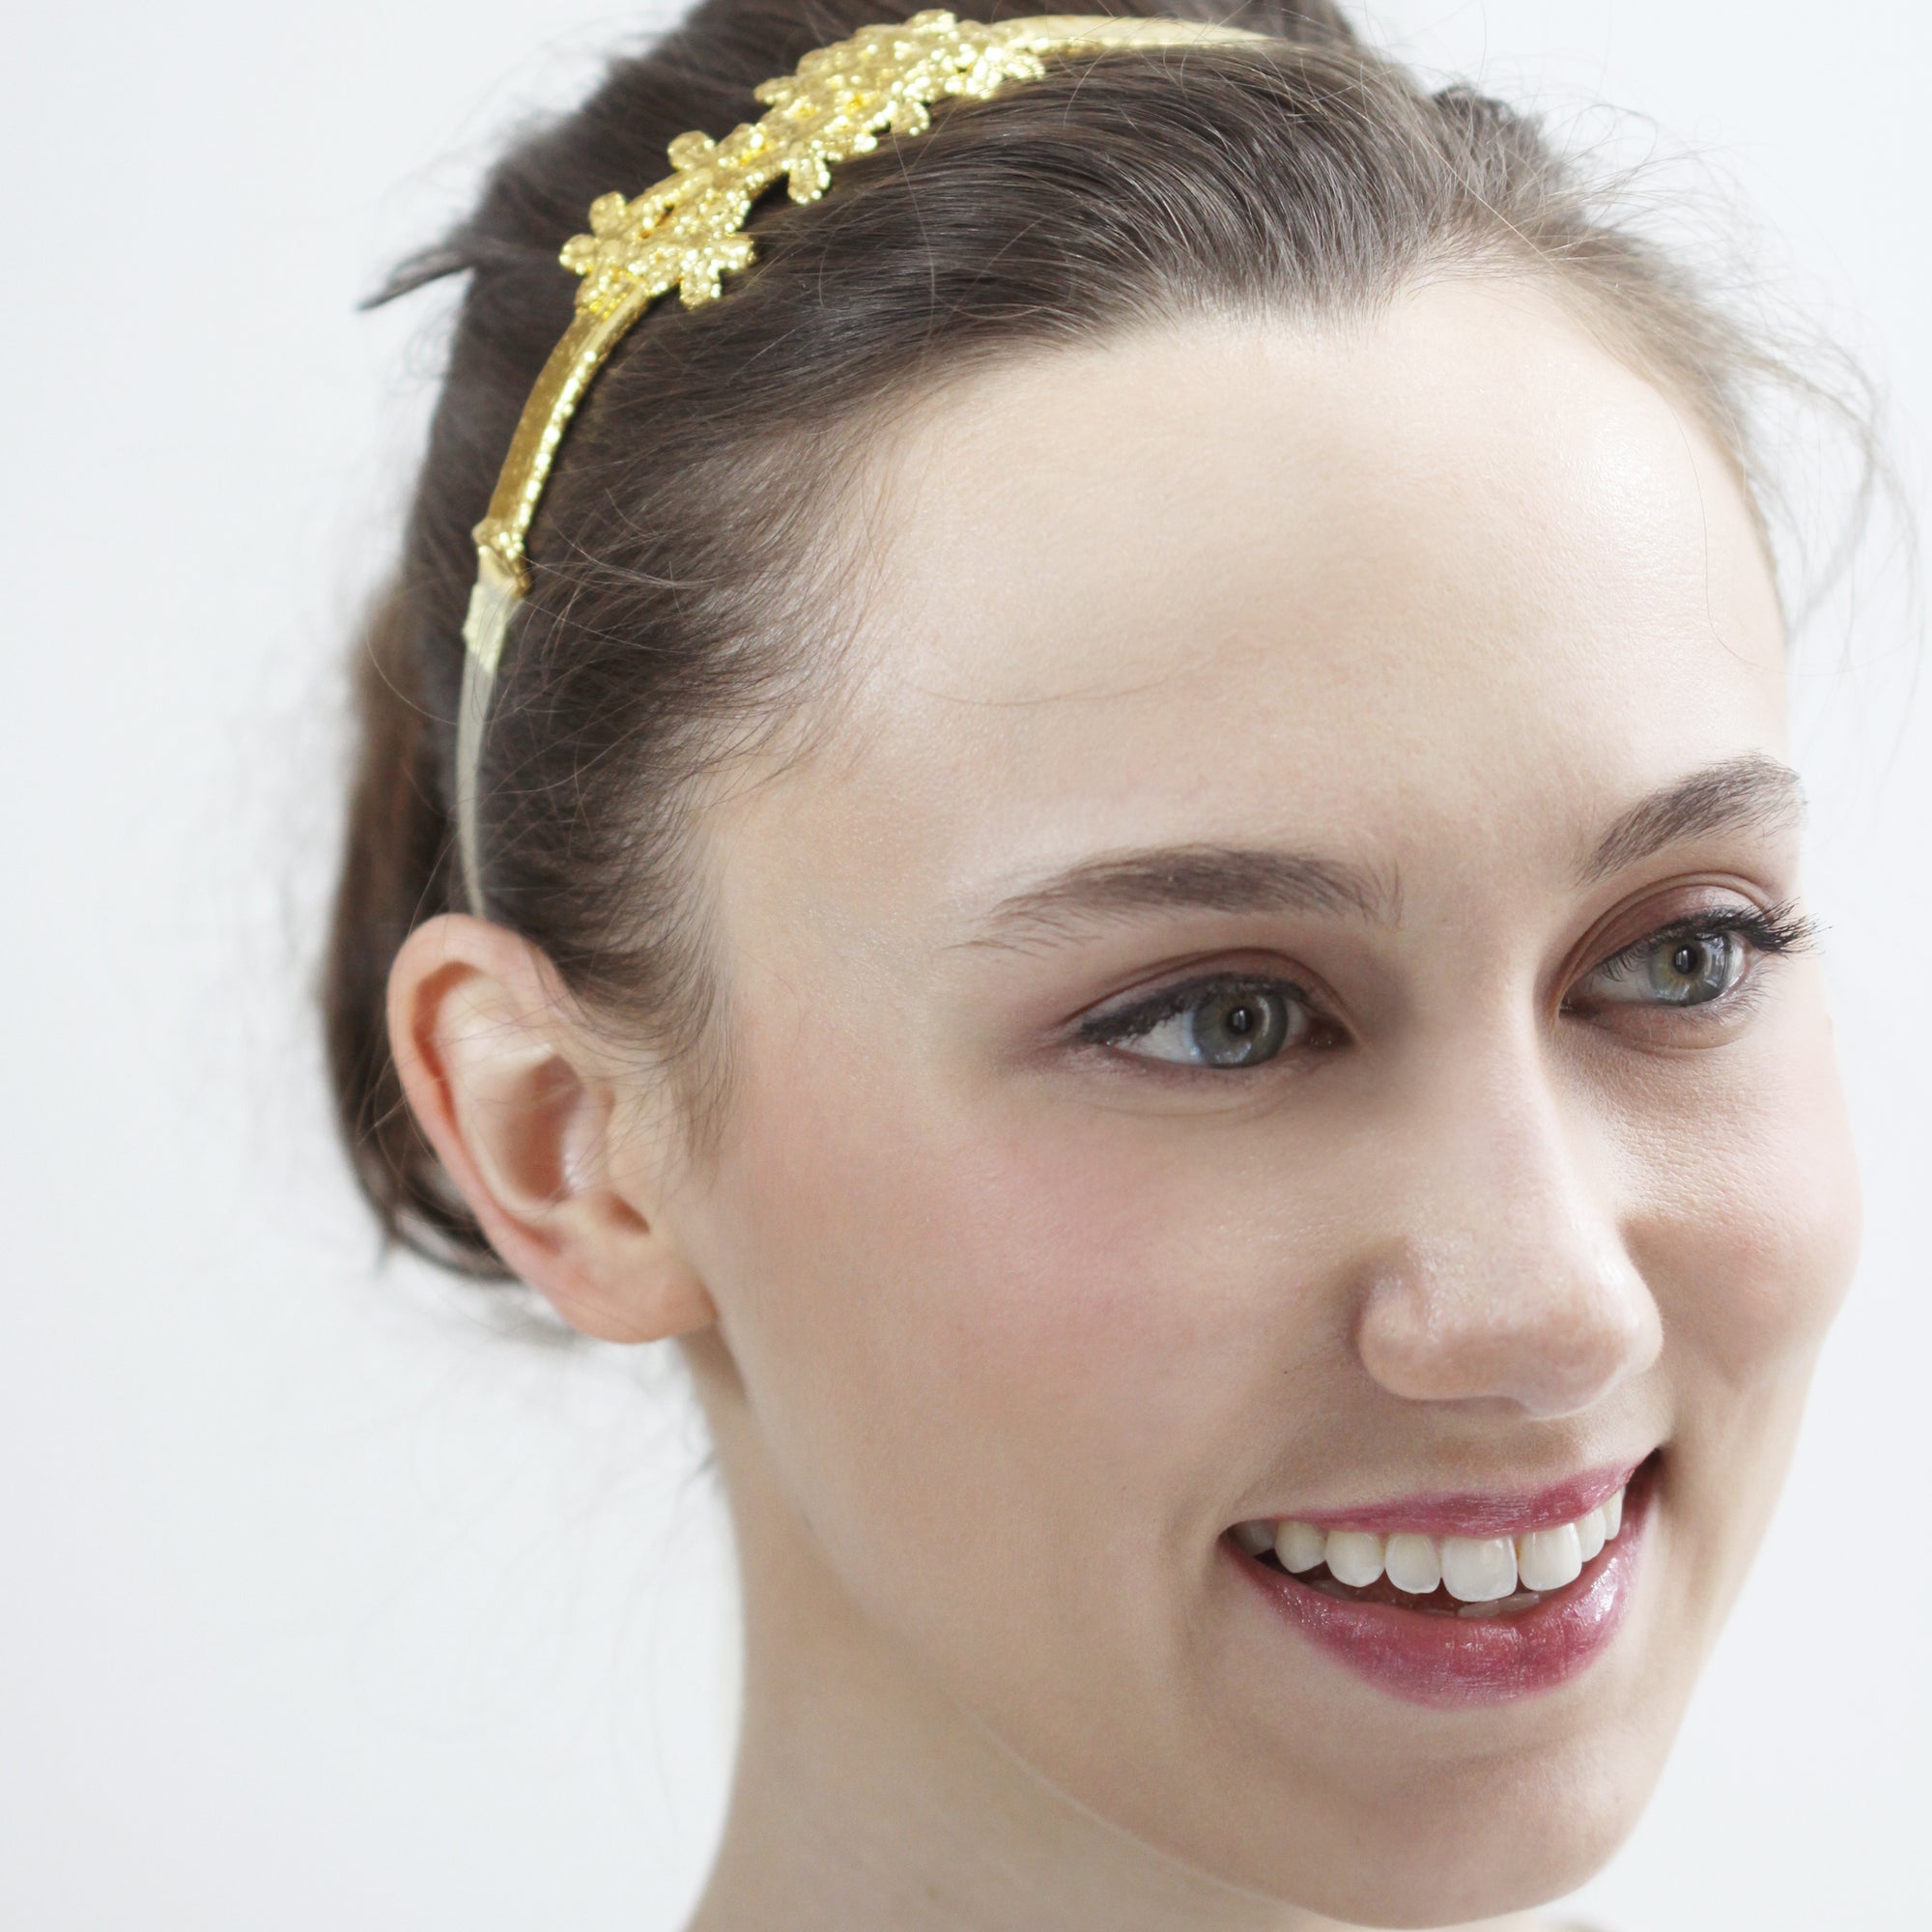 Flower lace hairband in sterling silver with silk ribbons.